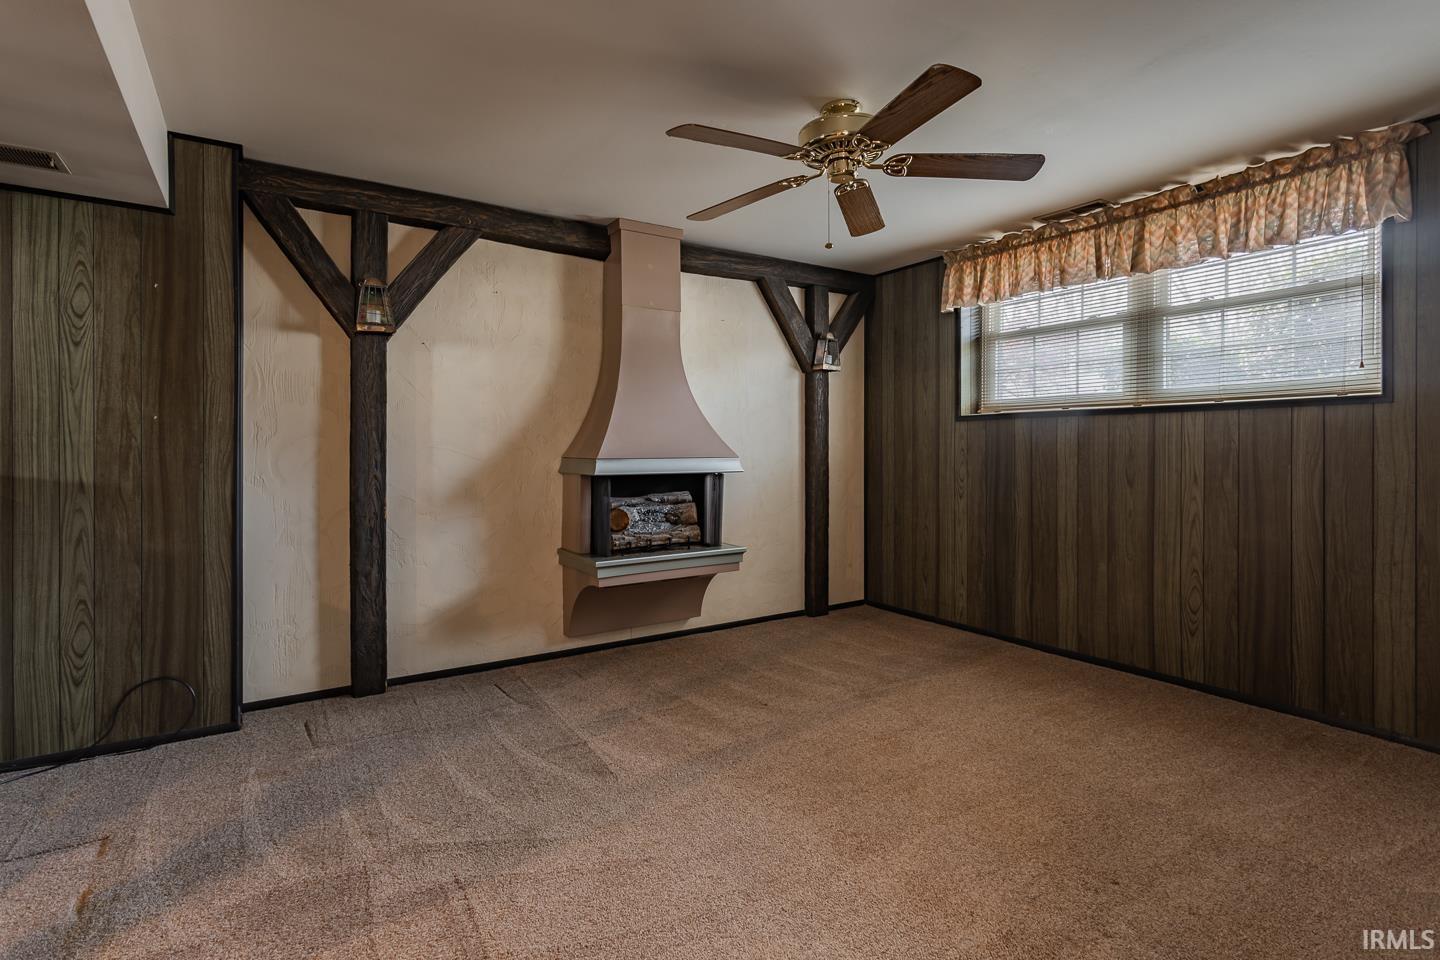 There is another multi-purpose room area that can easily be another Family Room, or Master Suite with the adjoining the Full Bath, and has an electric fireplace style wall heater.